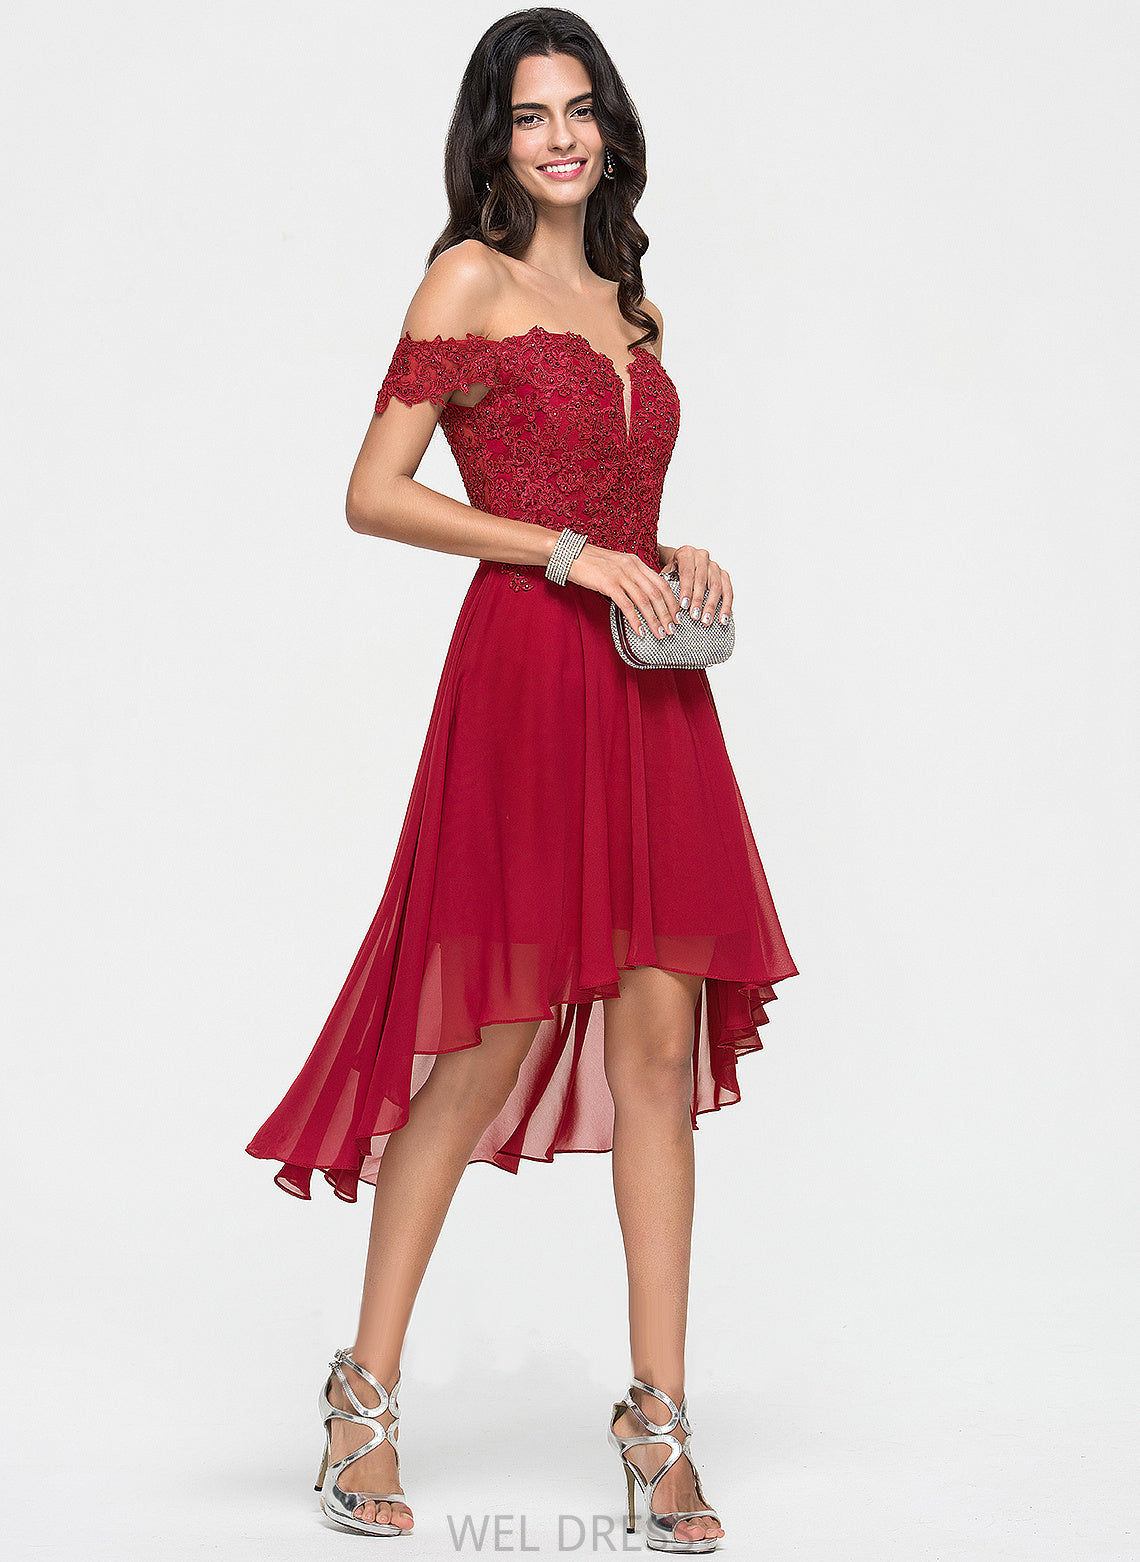 Lace Dress Off-the-Shoulder Homecoming With Chiffon Beading Homecoming Dresses Asymmetrical A-Line Norah